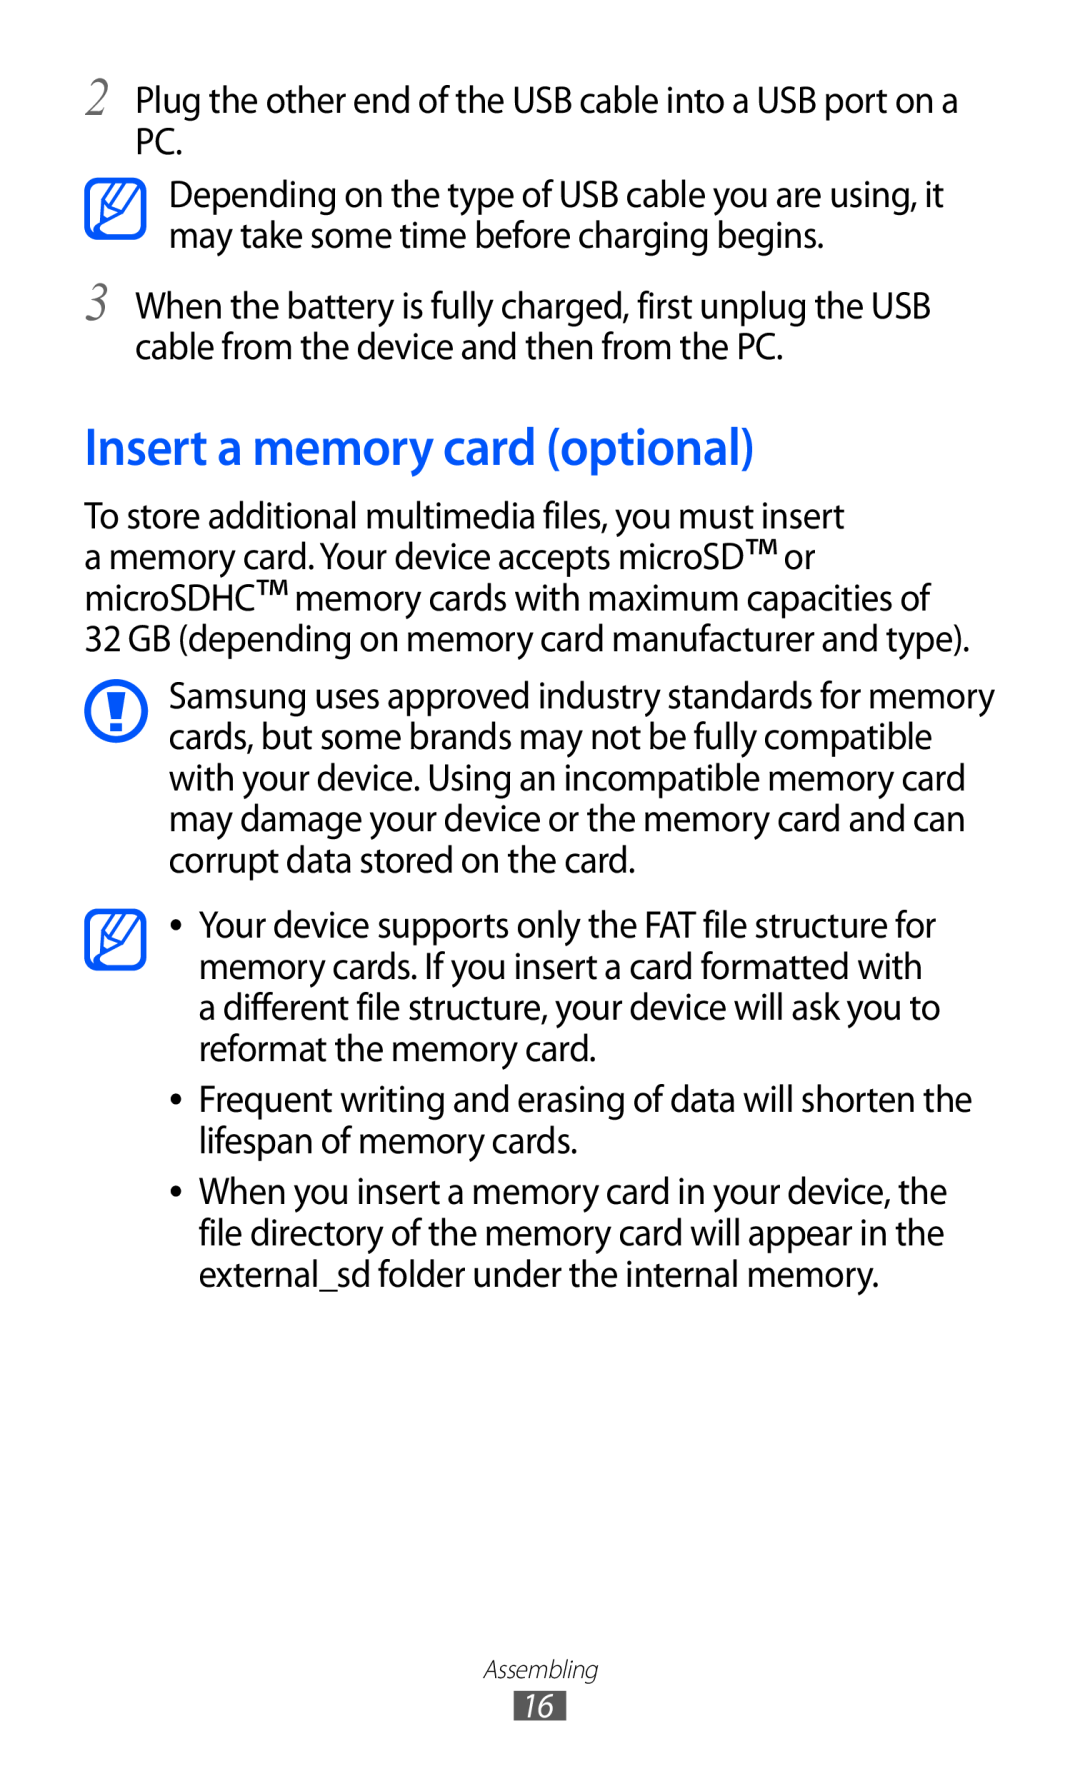 Samsung GT-I9070 user manual Insert a memory card optional, Plug the other end of the USB cable into a USB port on a PC 